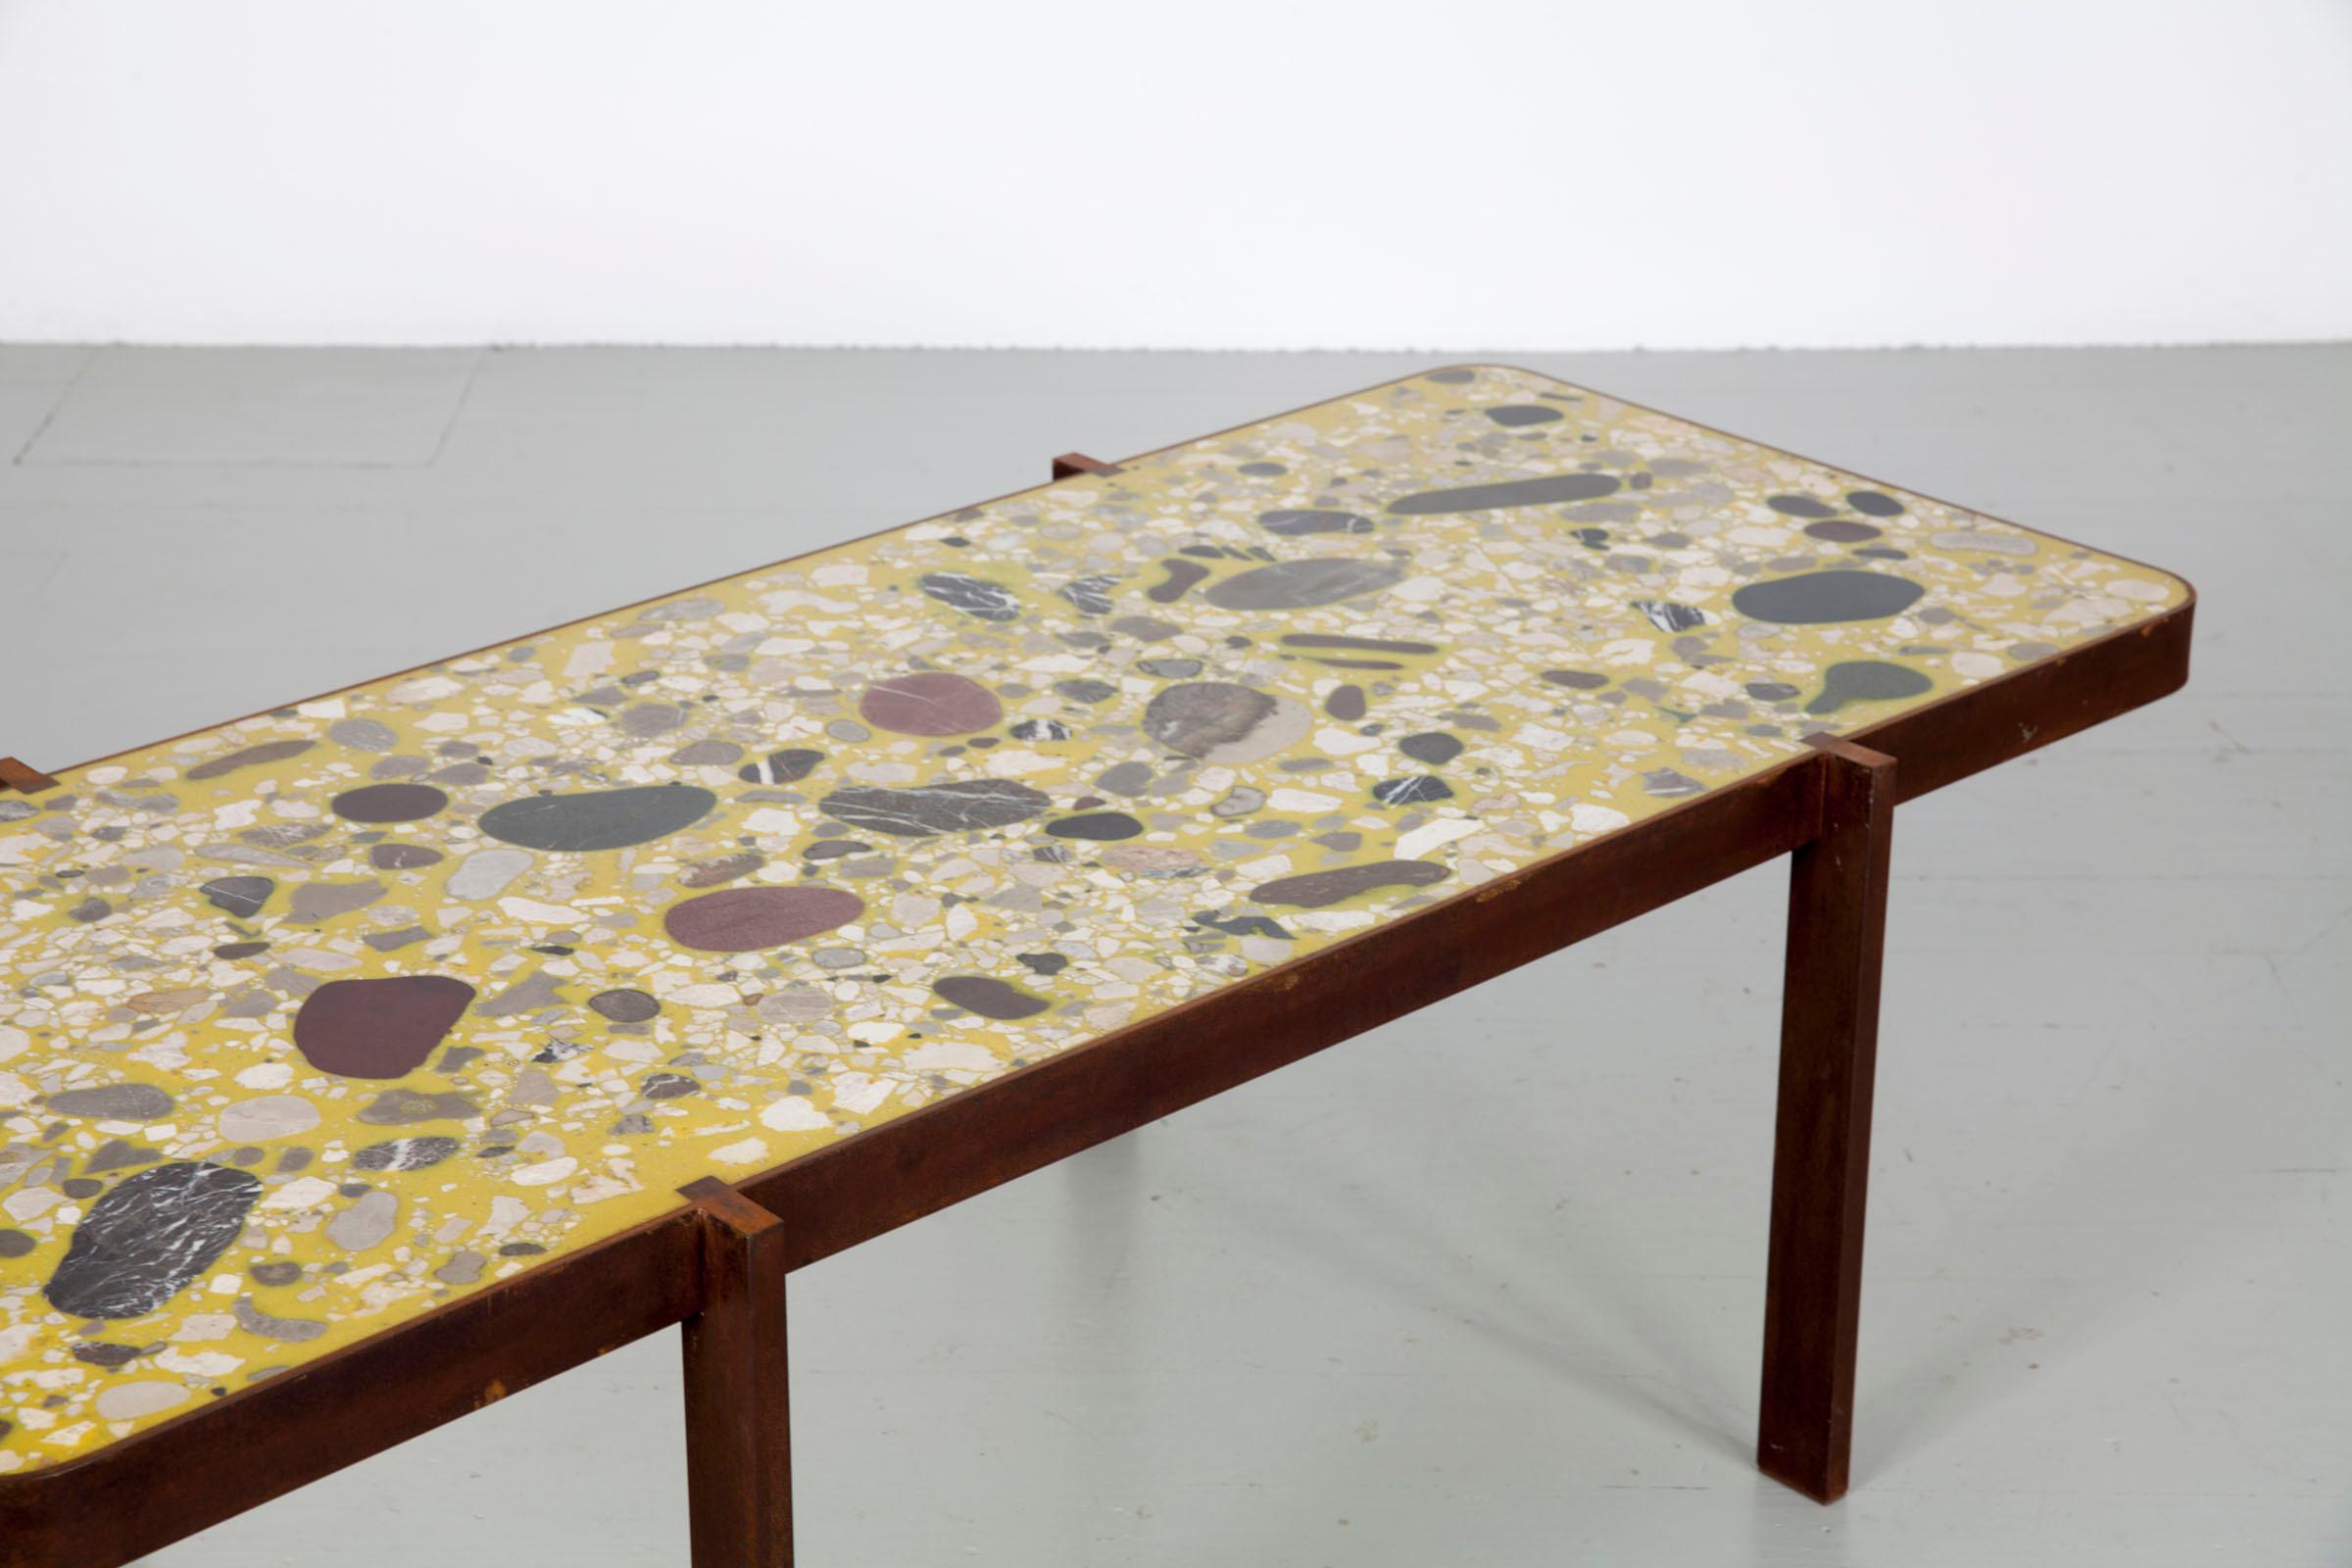 Felix Muhrhofer Contemporary Terrazzo Table with Corroded Steel Construction For Sale 6